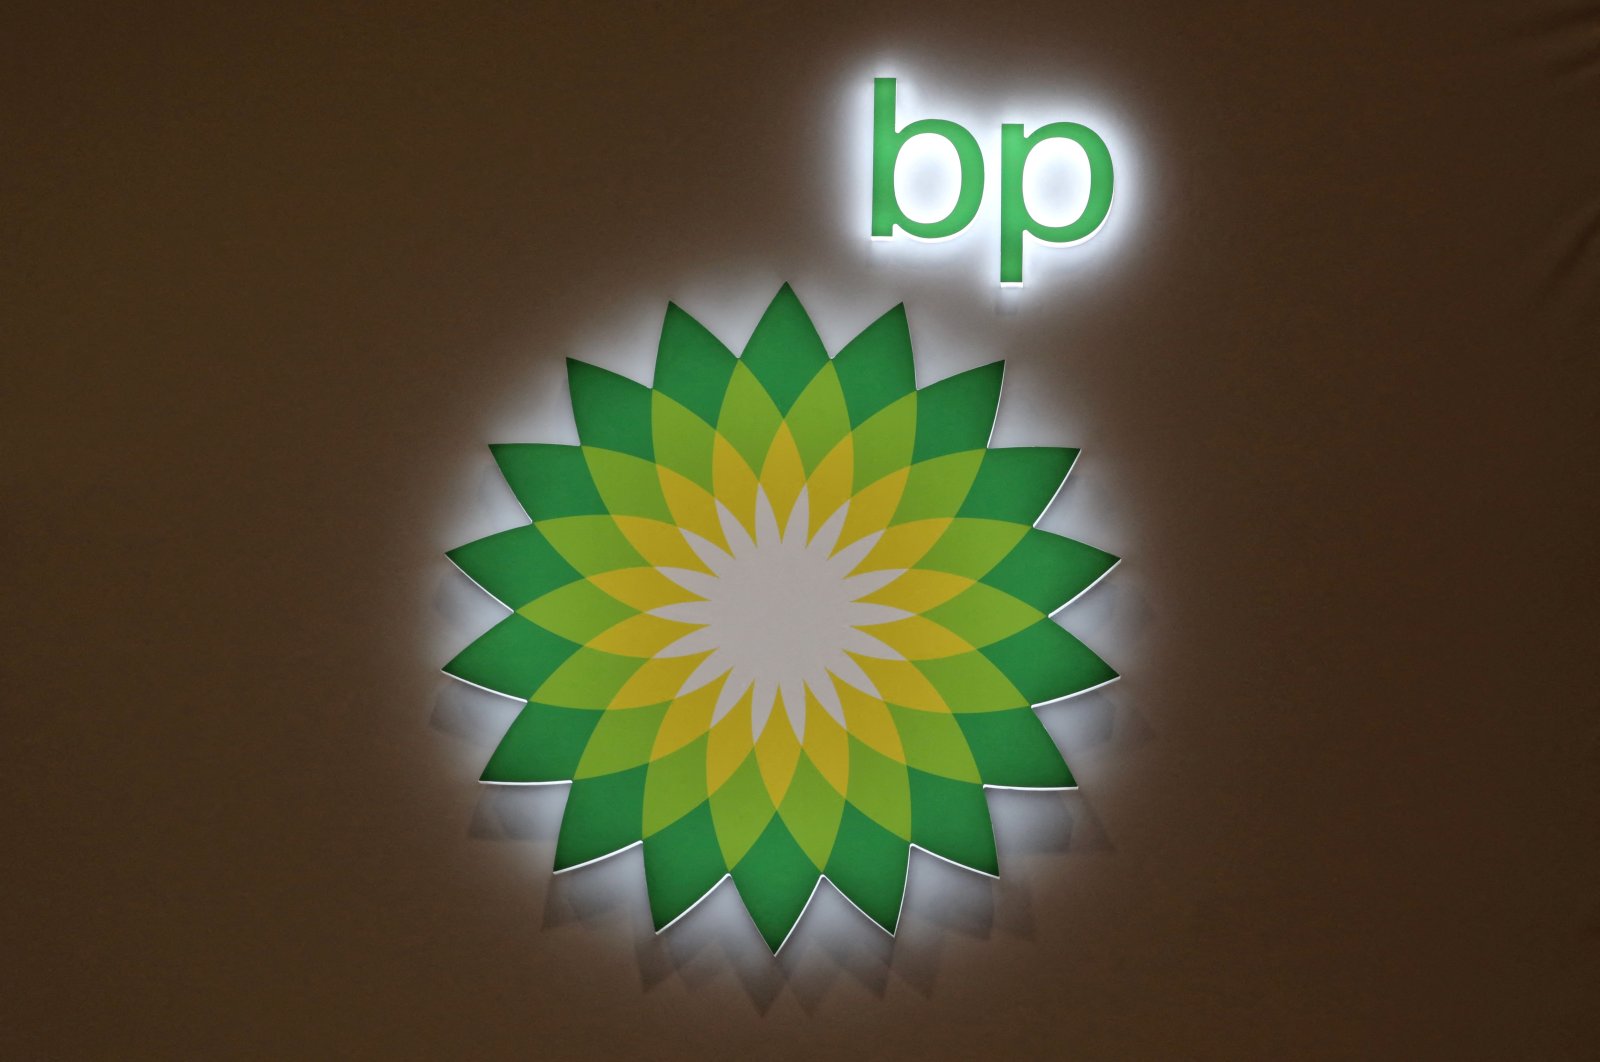 The logo of British multinational oil and gas company BP is displayed at their booth during the LNG 2023 energy trade show in Vancouver, British Columbia, Canada, July 12, 2023. (Reuters Photo)